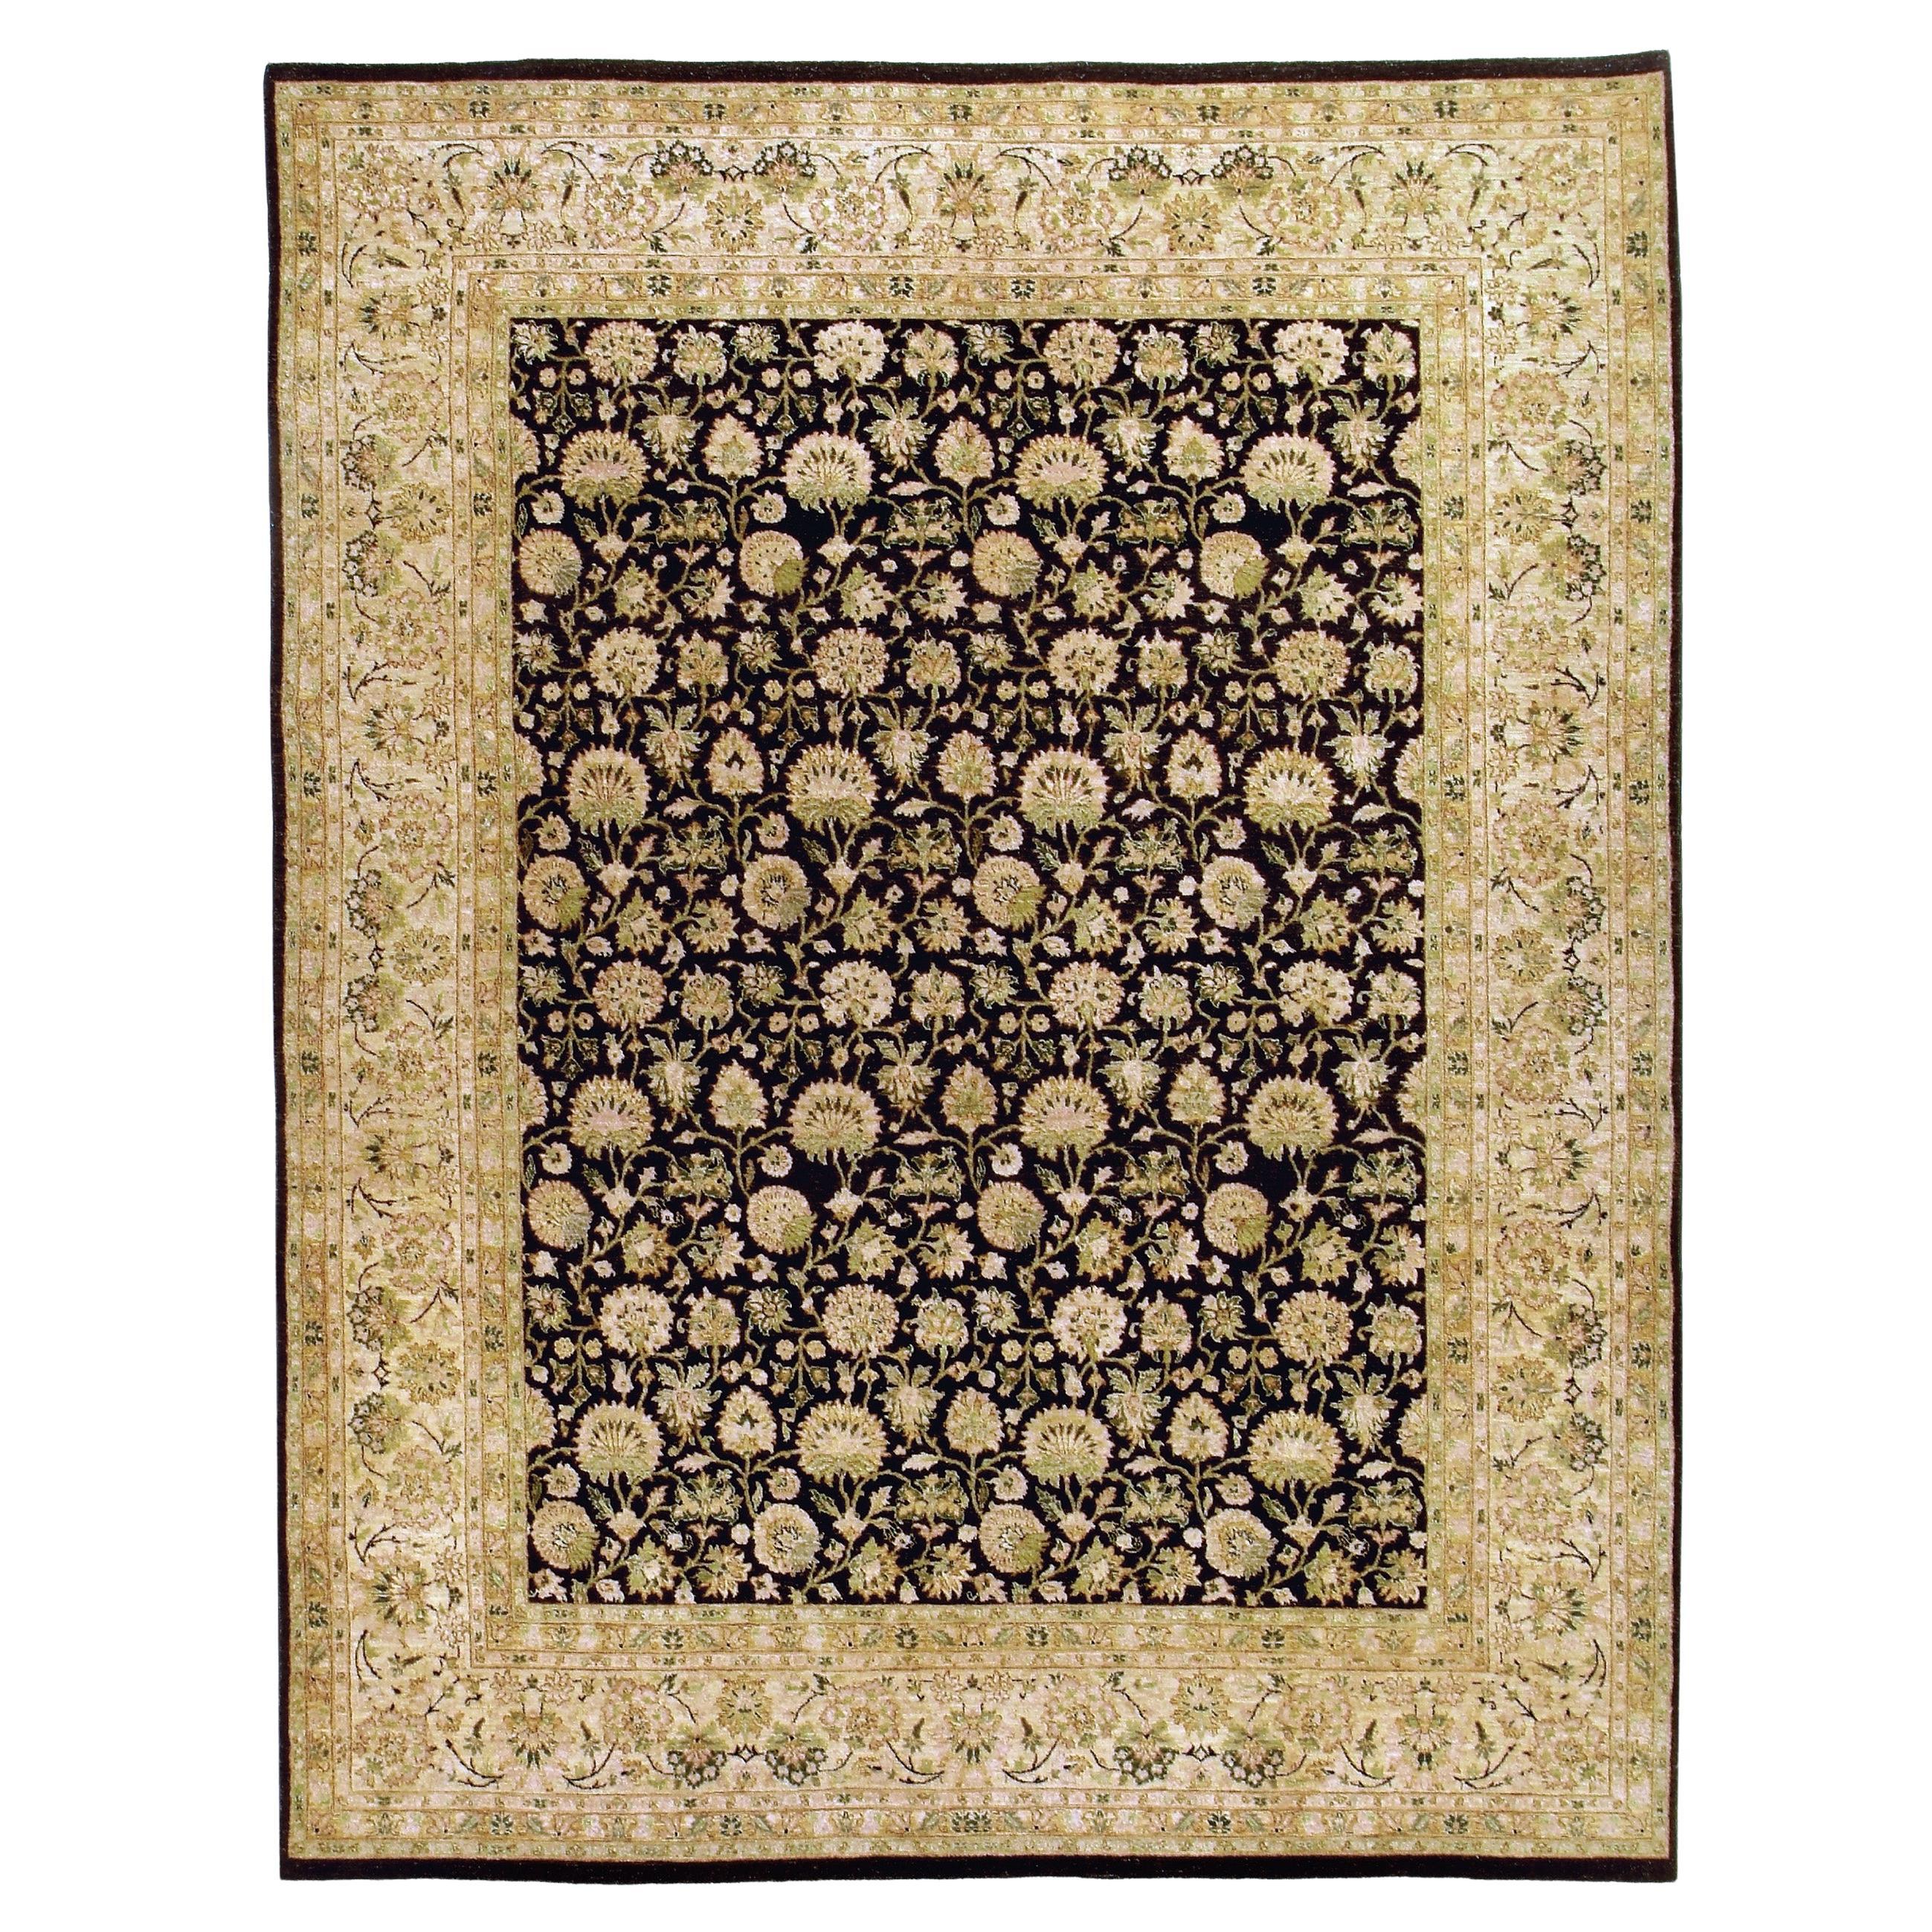 Luxury Traditional Hand-Knotted Emogli Black and Cream 10X14 Rug